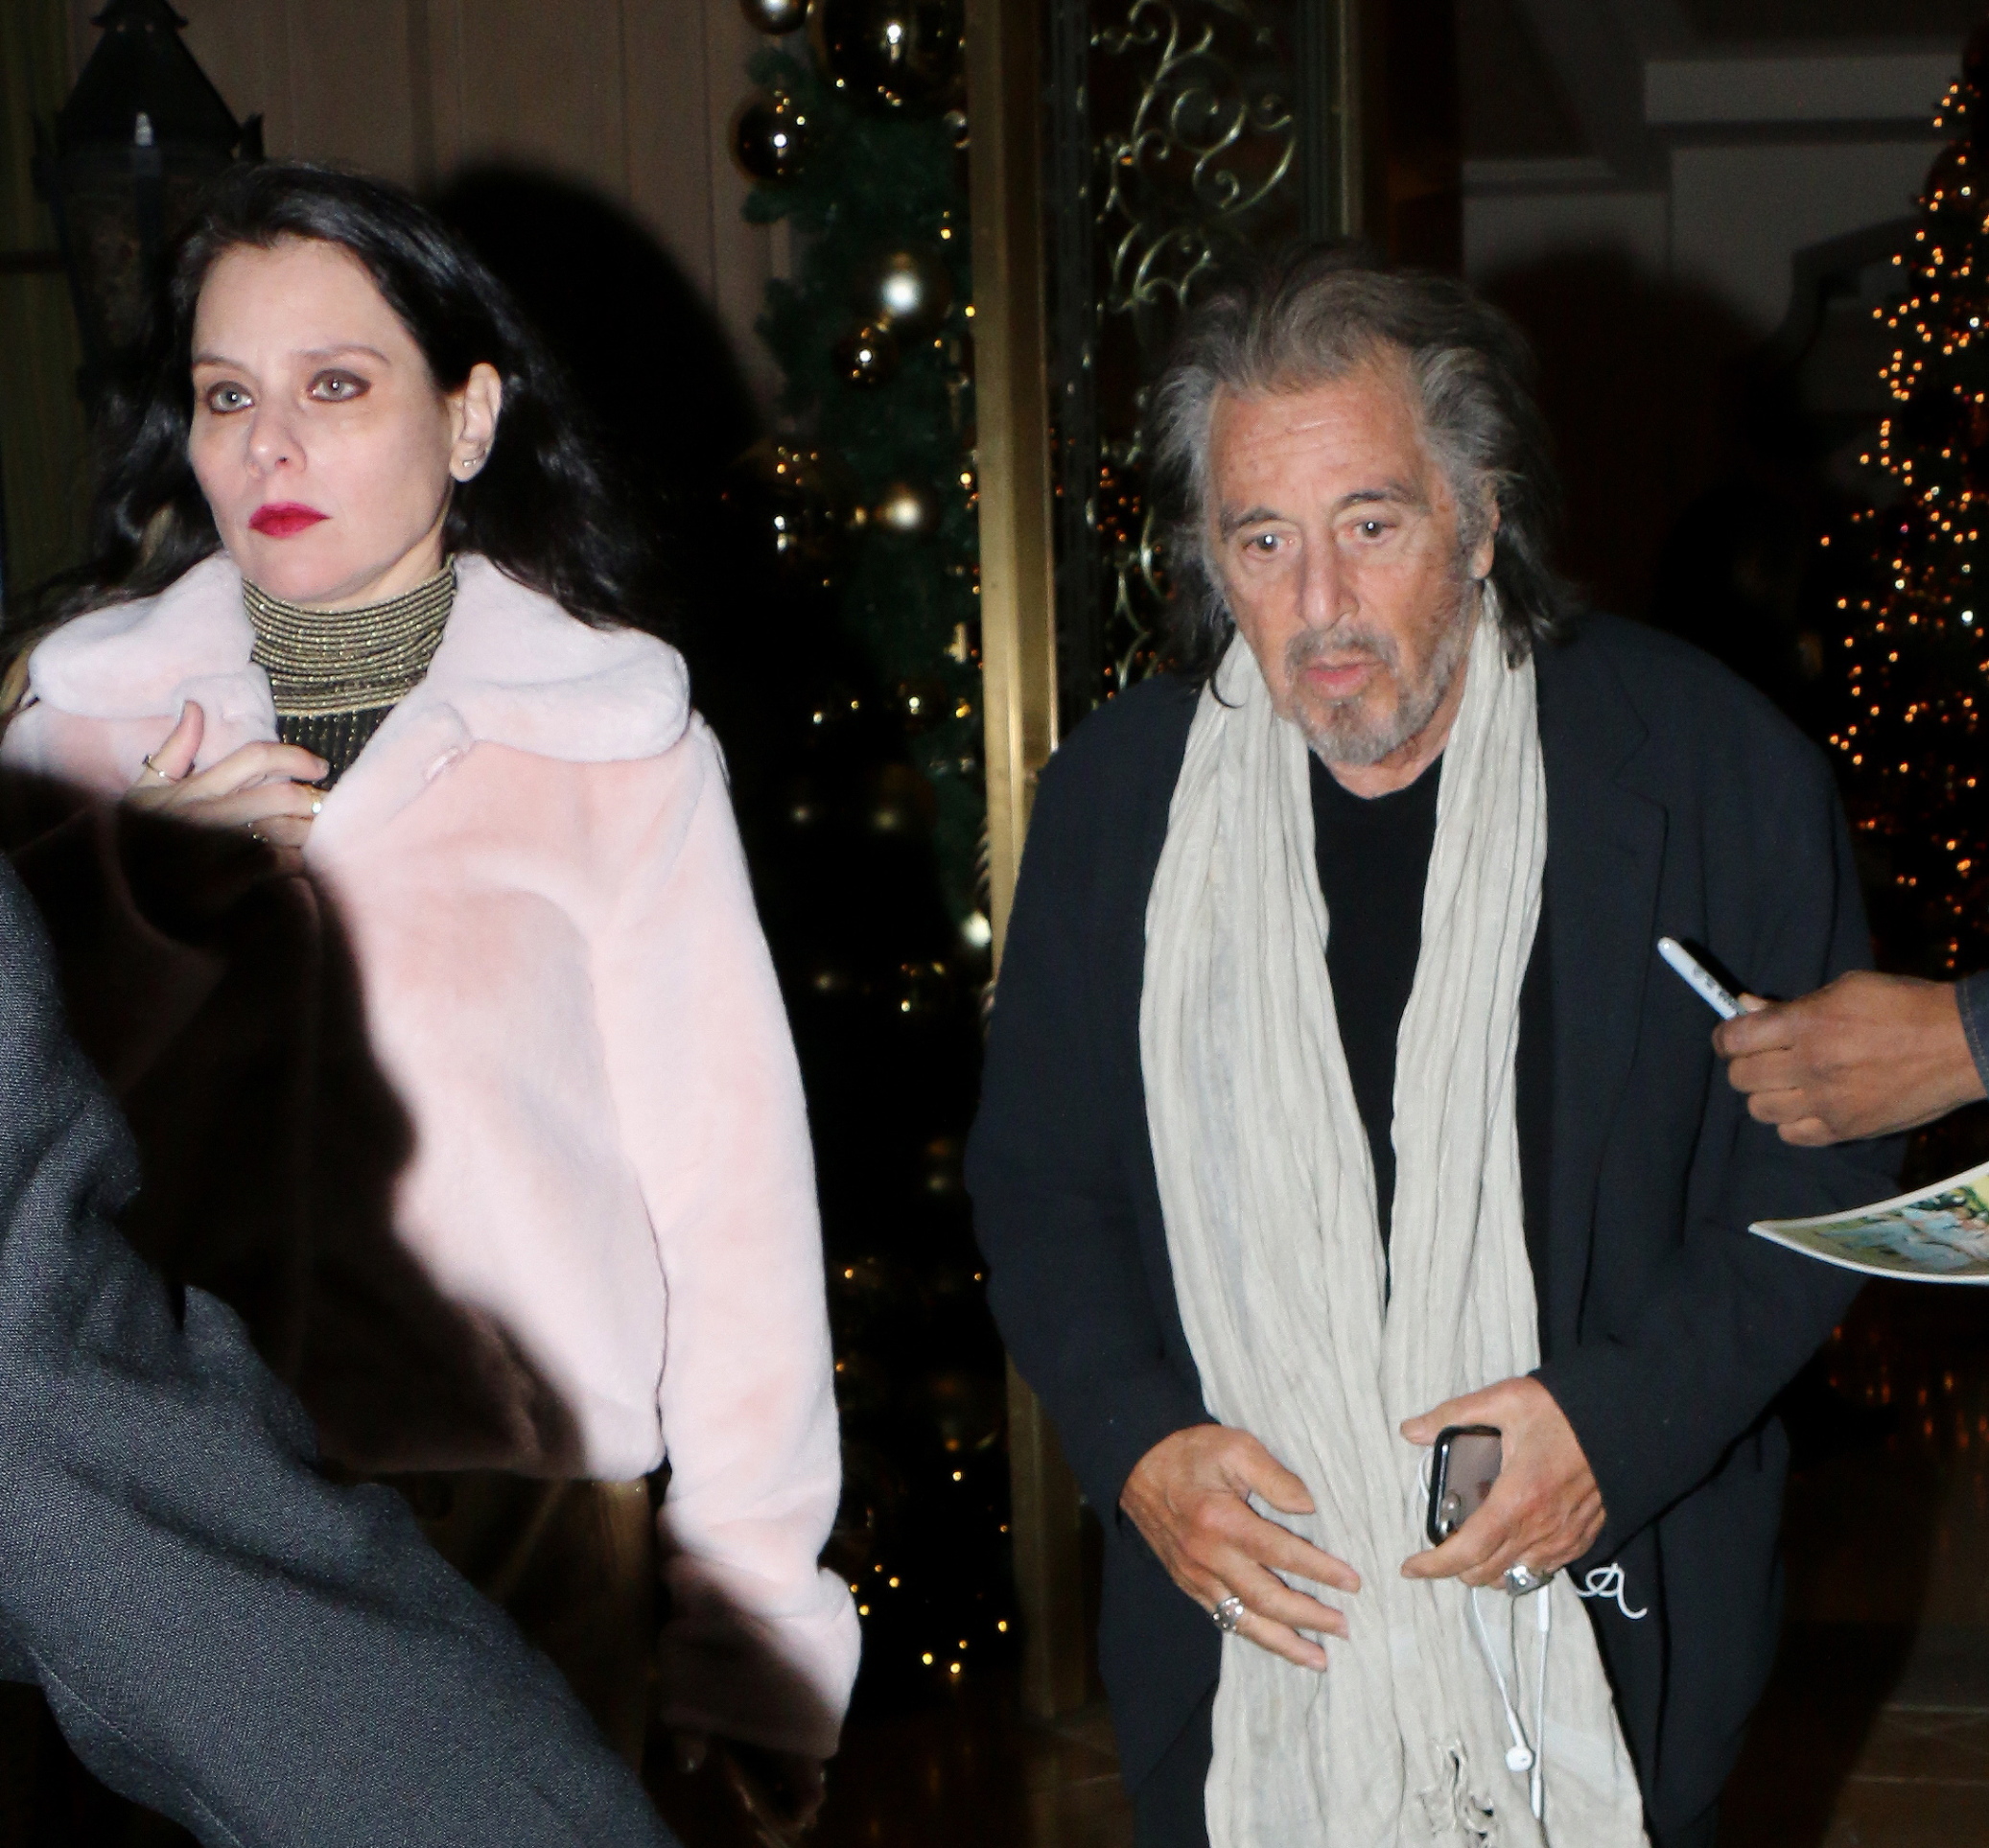 EXCLUSIVE: Al Pacino pauses to sign autographs as he leaves the Montage Beverly Hills with a mystery lady. Los Angeles, California - Monday January 6, 2019., Image: 491473956, License: Rights-managed, Restrictions: N, Model Release: no, Credit line: MHD/PacificCoastNews / Pacific coast news / Profimedia